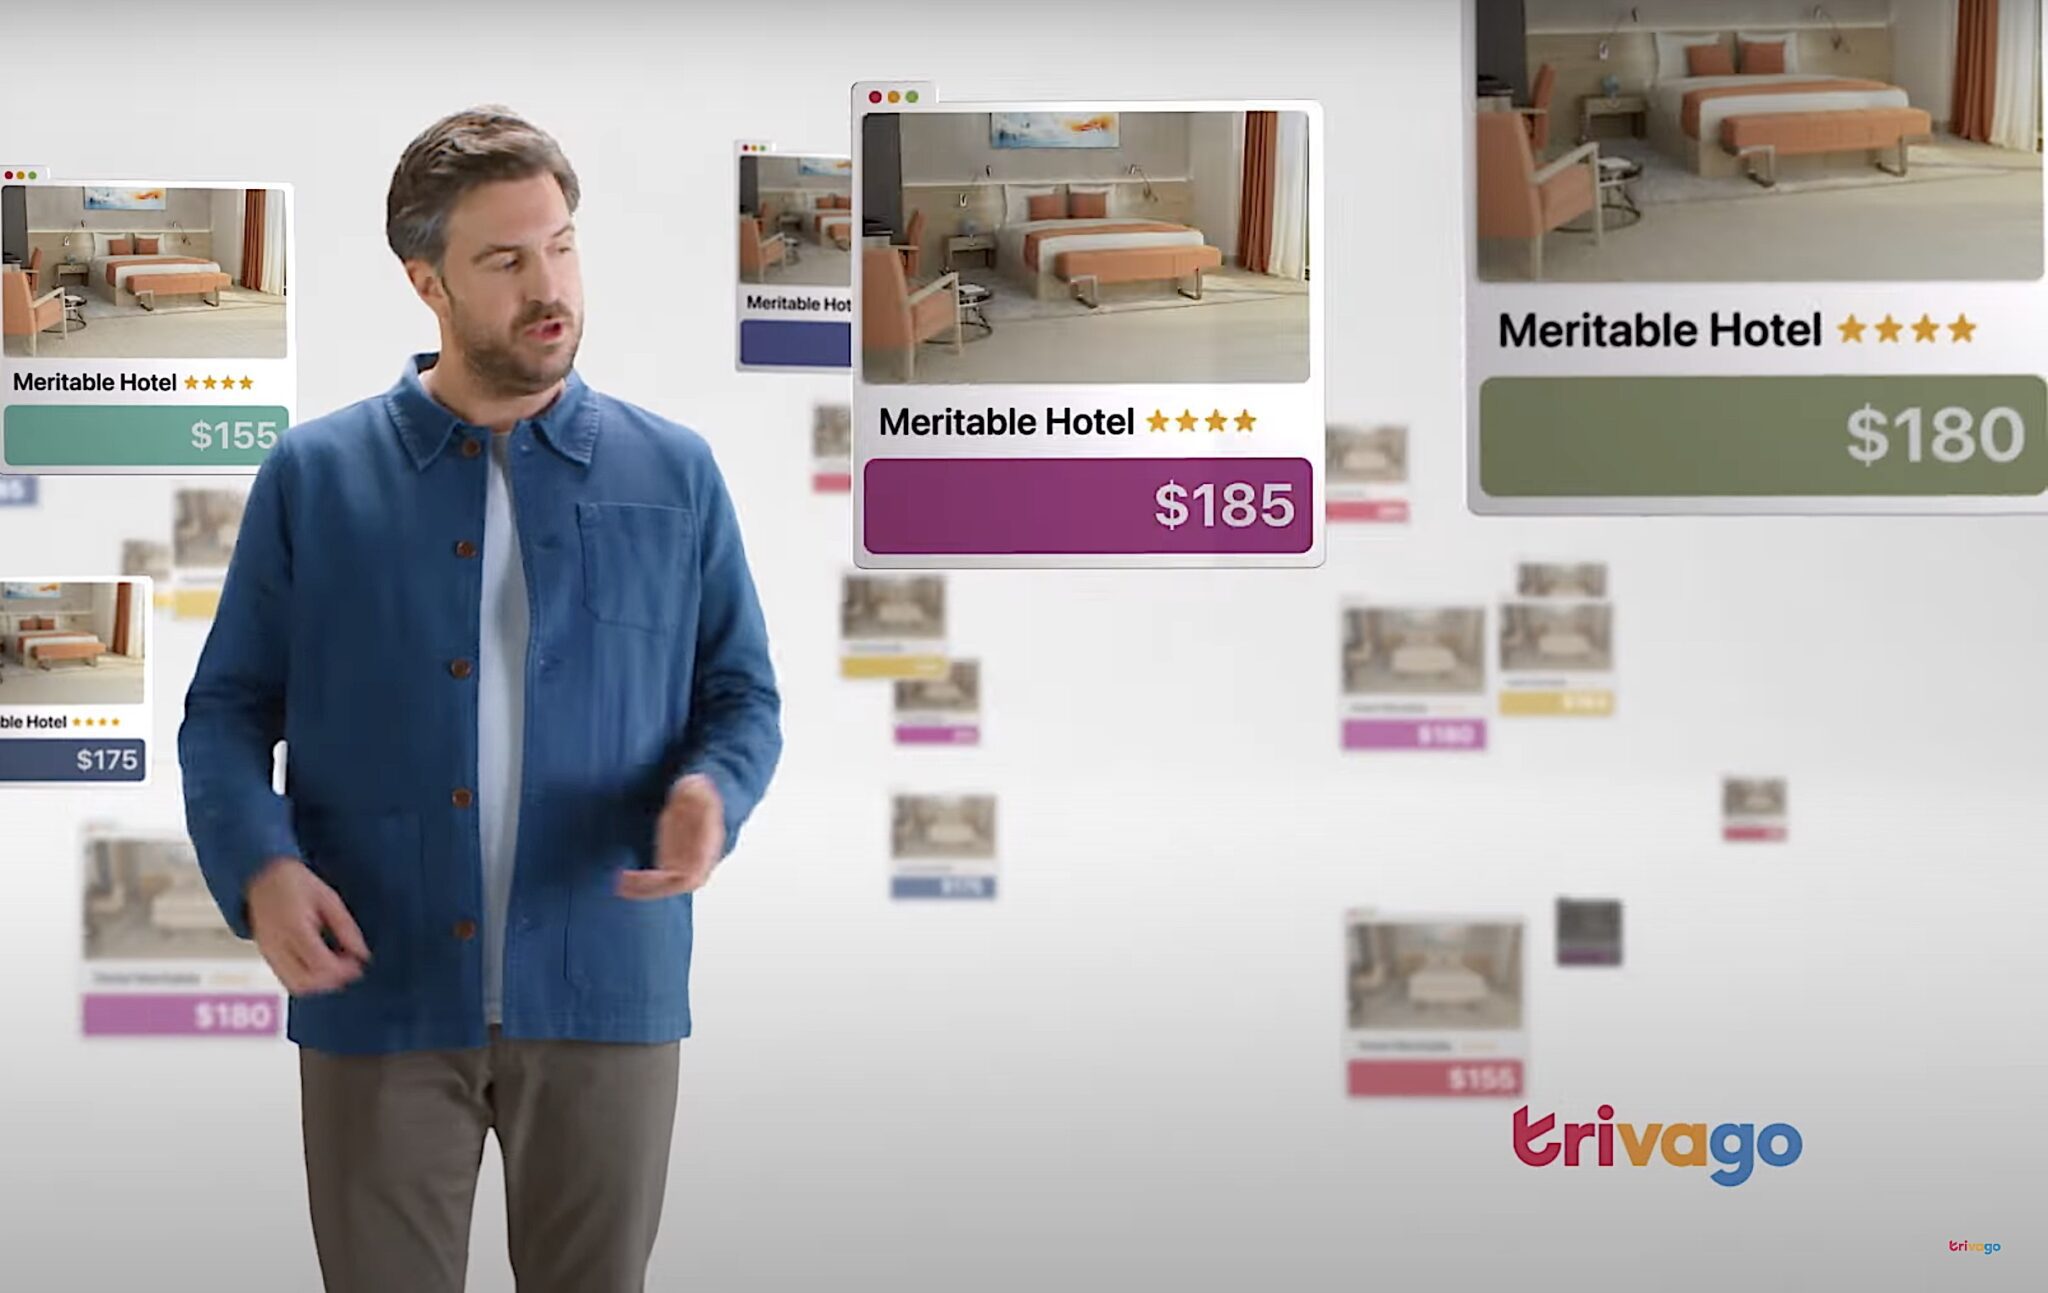 Mr Trivago ad 2023 showing hotel prices from different vendors. Source: Trivago